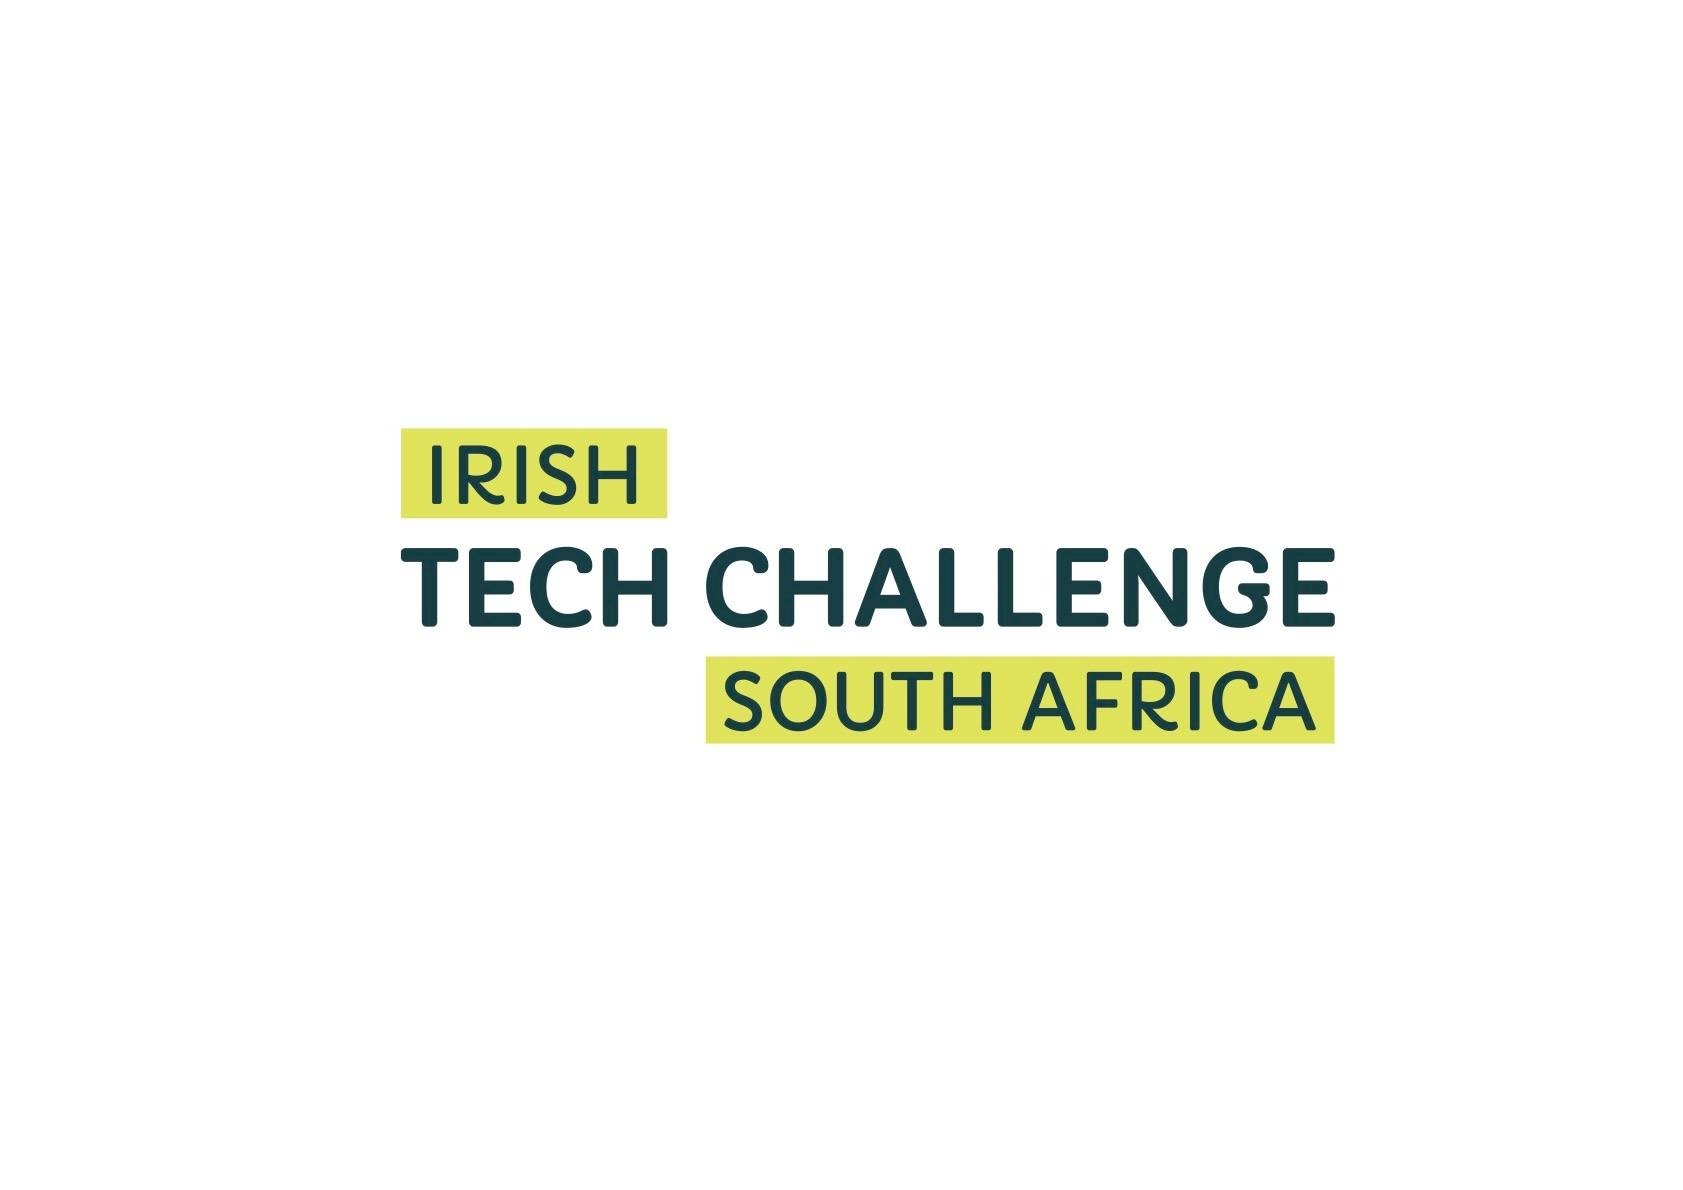 #PODCAST 10,000 Euros and a networking tour to Ireland are among the prizes at this year's Irish Tech Challenge #sabcnews